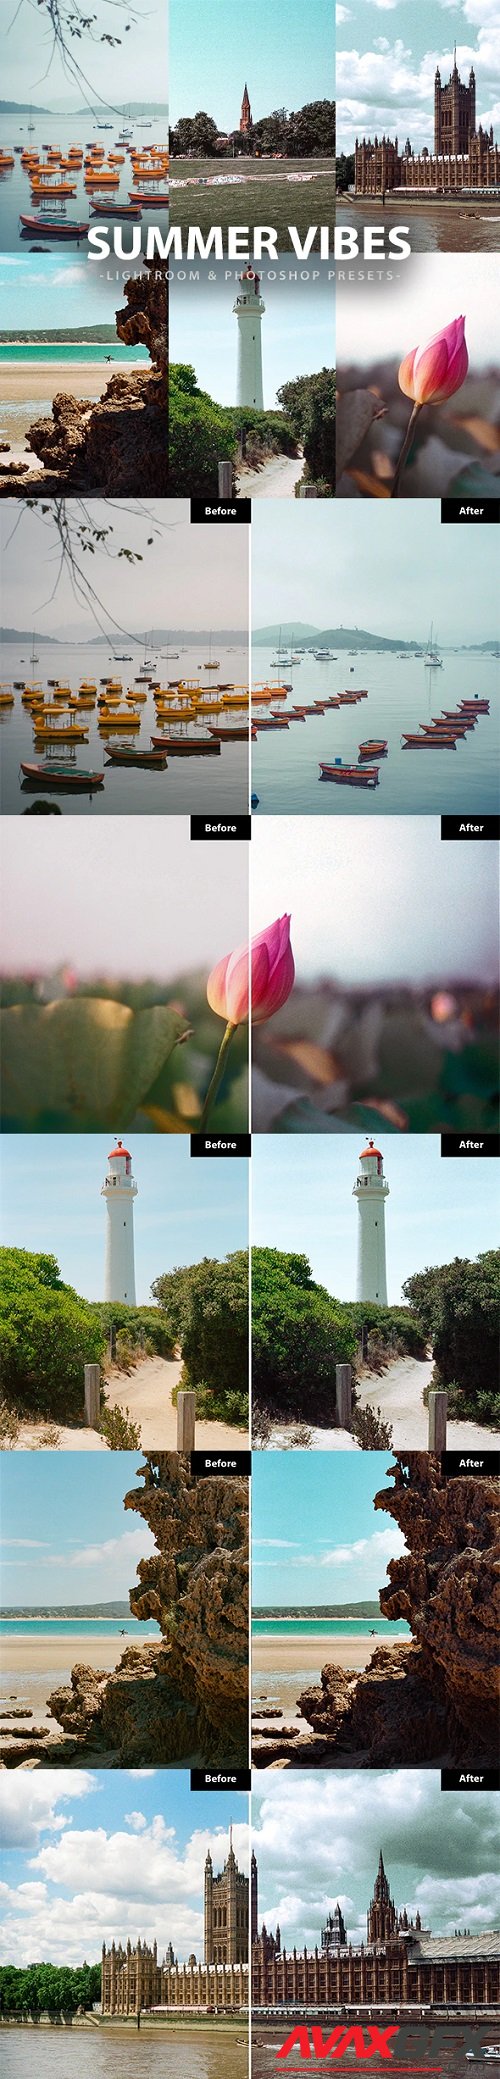 6 Summer vibes lightroom and photoshop presets - 45383106